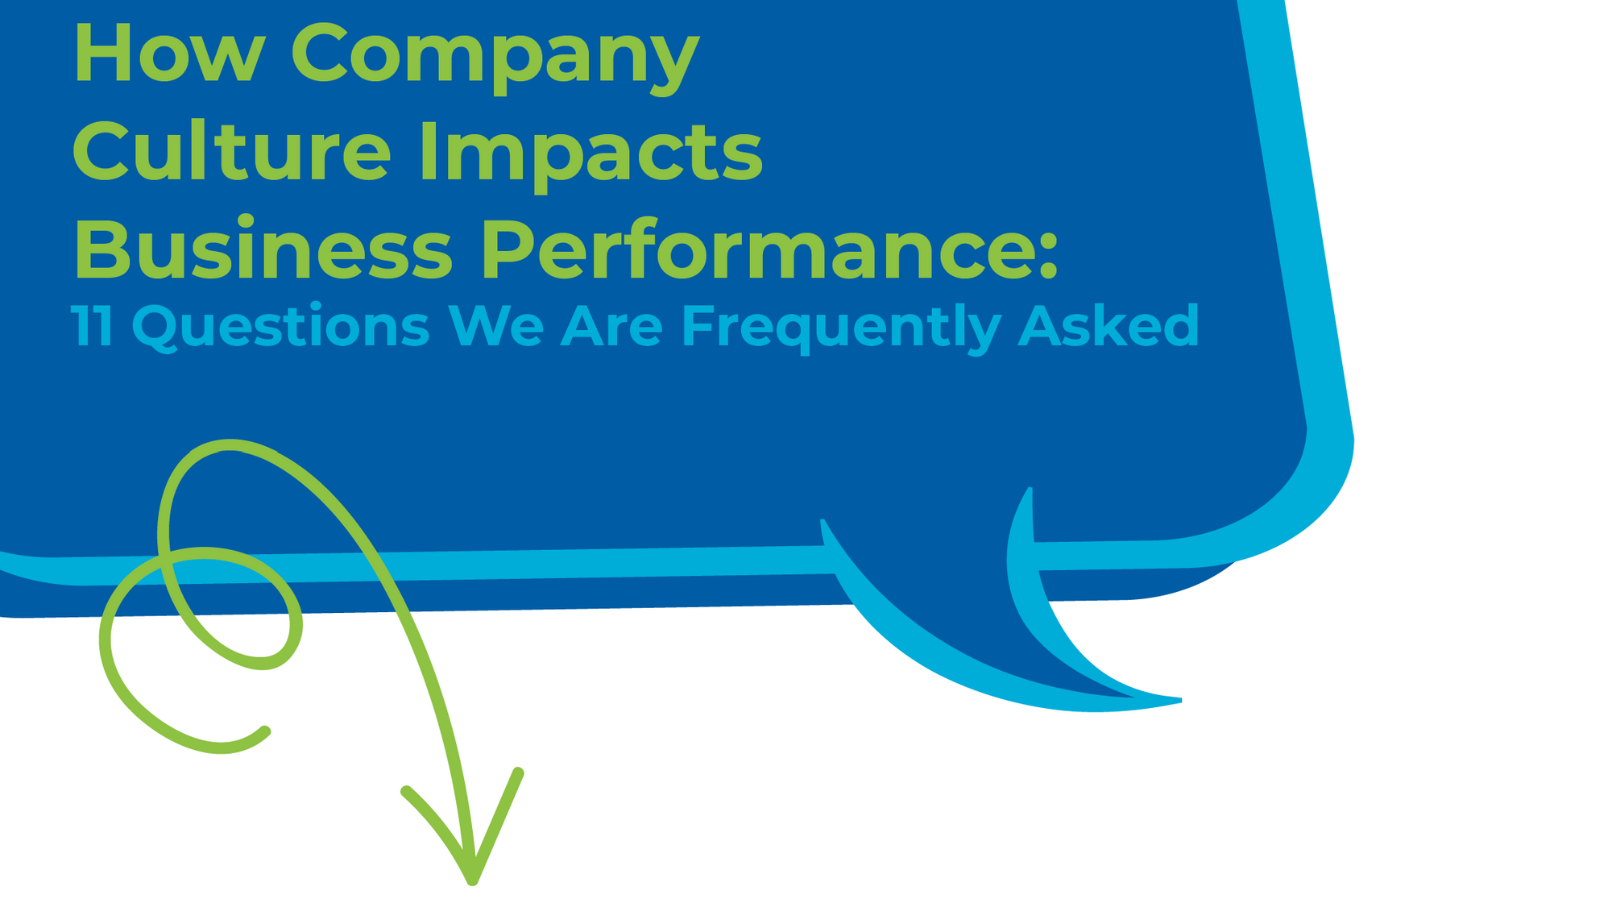 [Infographic] How Company Culture Impacts Business Performance